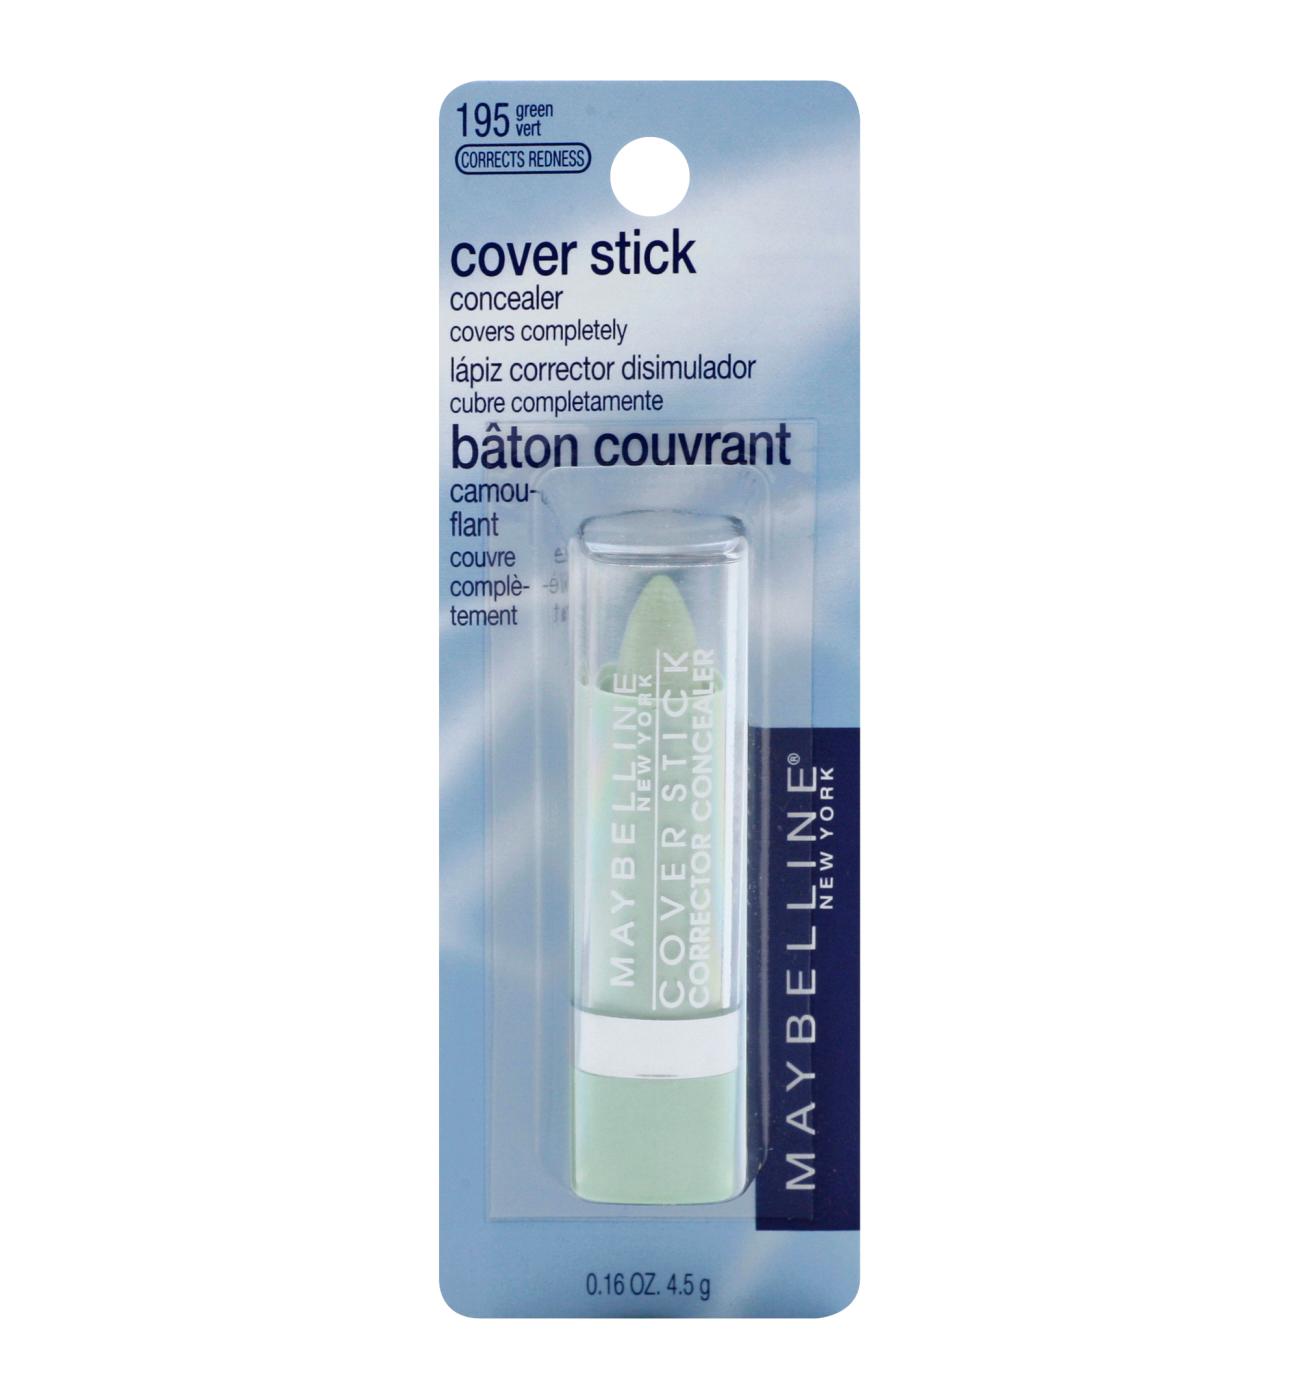 Maybelline Cover Stick Corrector Concealer, Green Corrects Redness; image 1 of 3